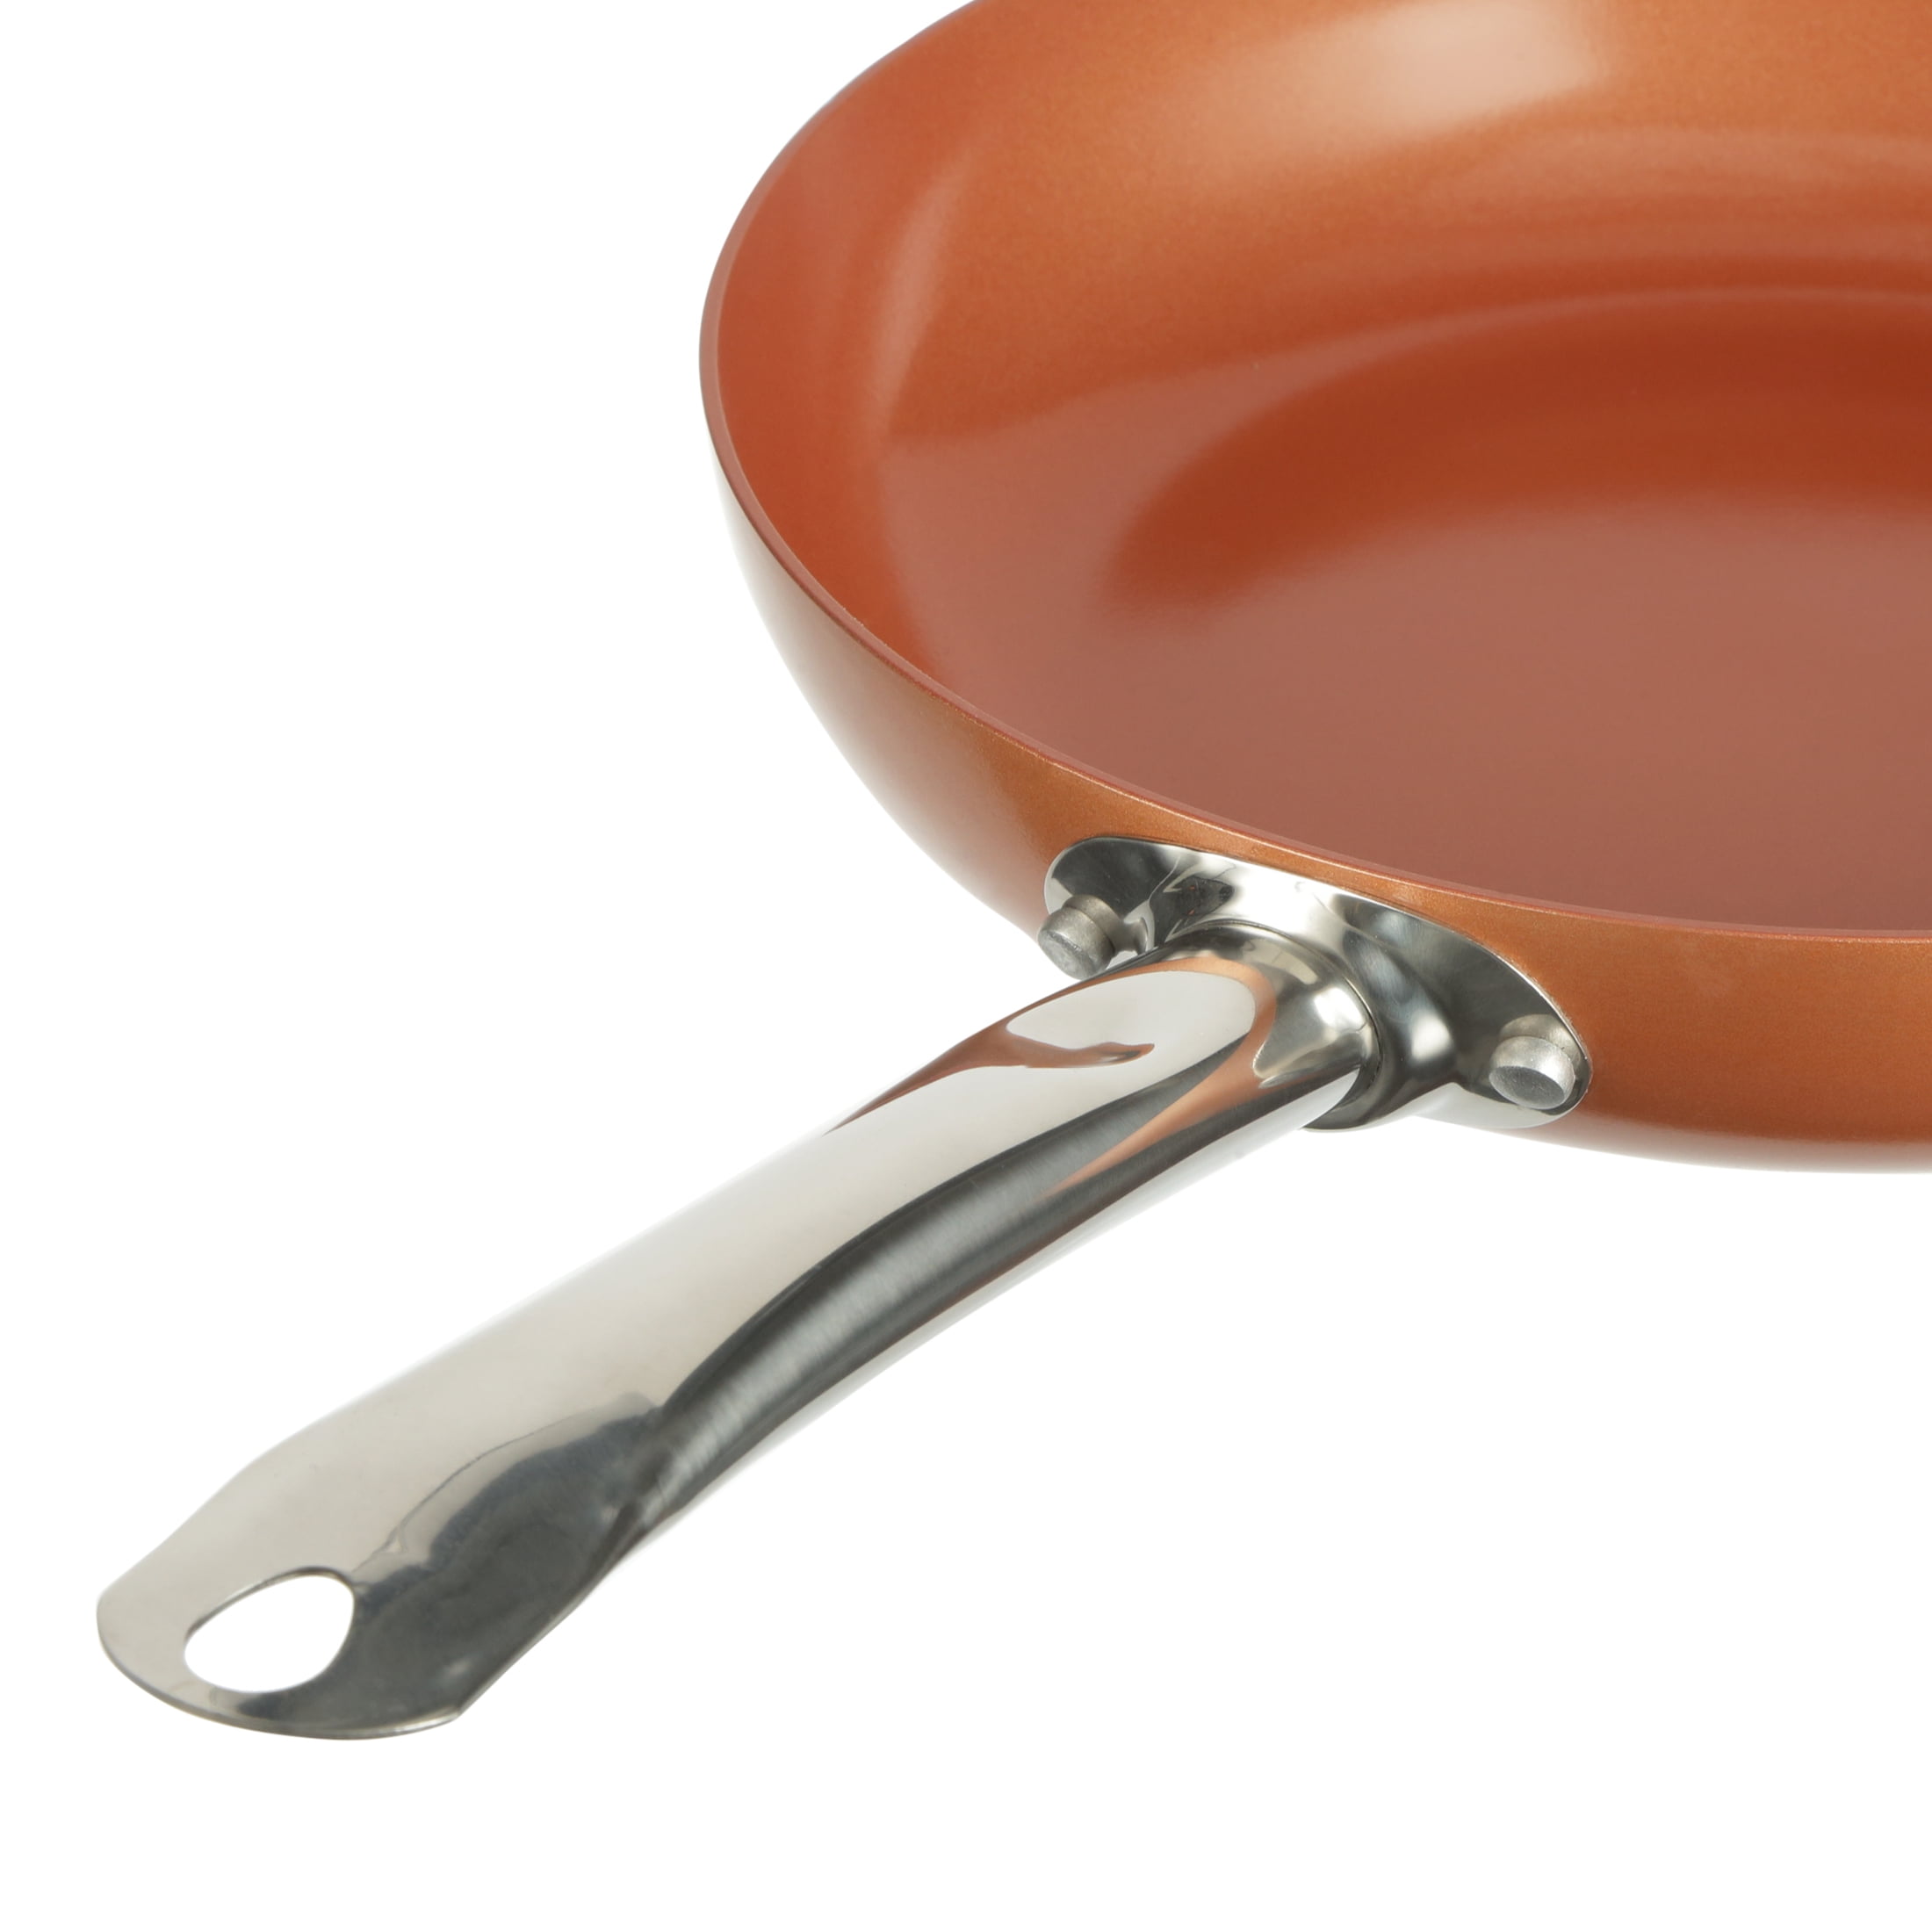 Copper Chef A-00438-19 8 8 Round Fry Pan, 8 